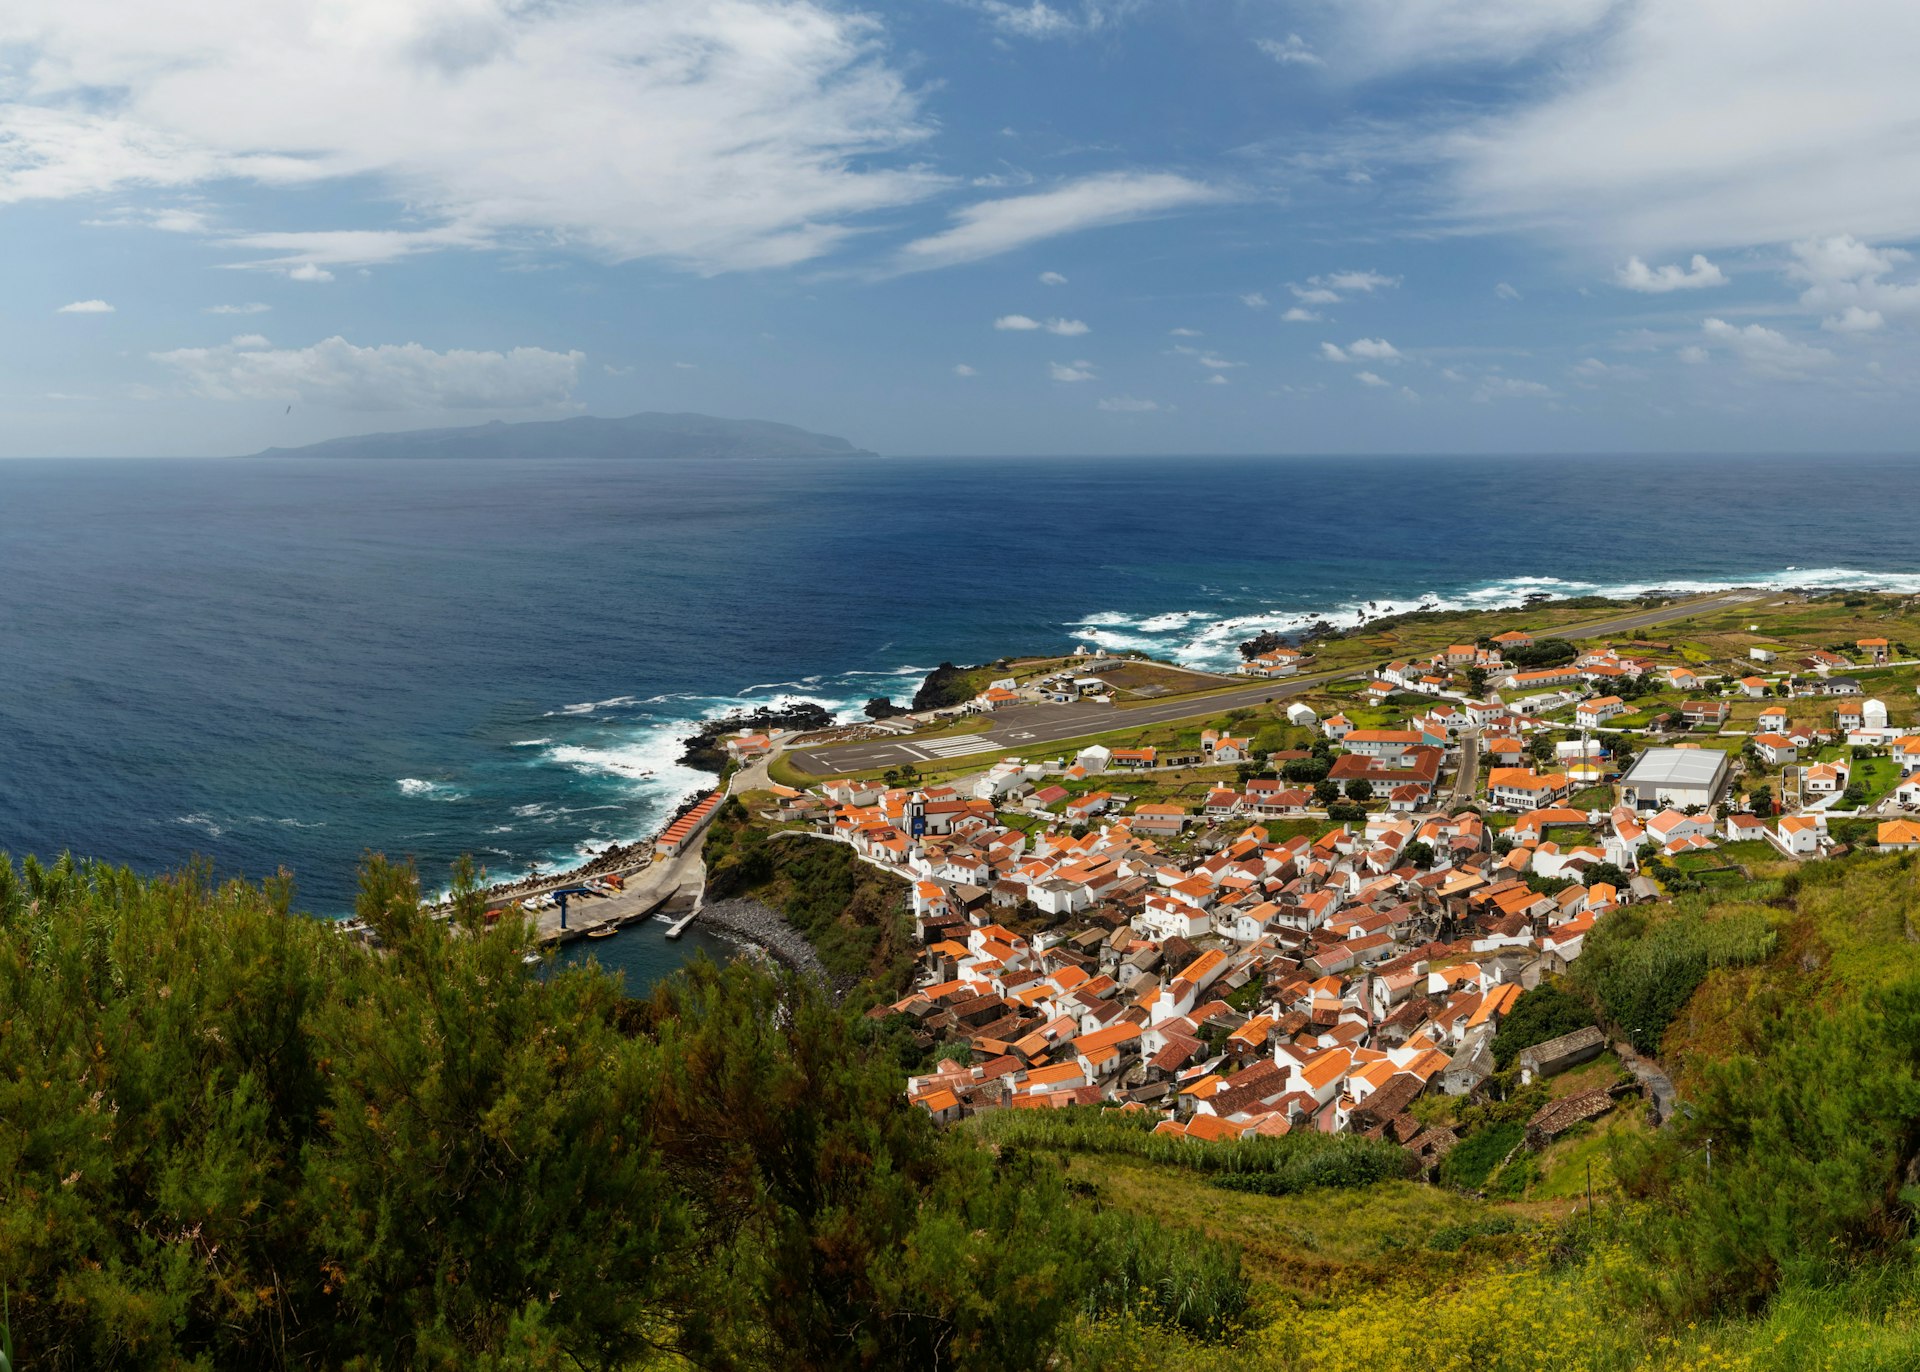 A view looking down on Vila do Corvo, a small town with tightly packed houses with terracotta rooftops.The island of Flores is visible on the horizon.